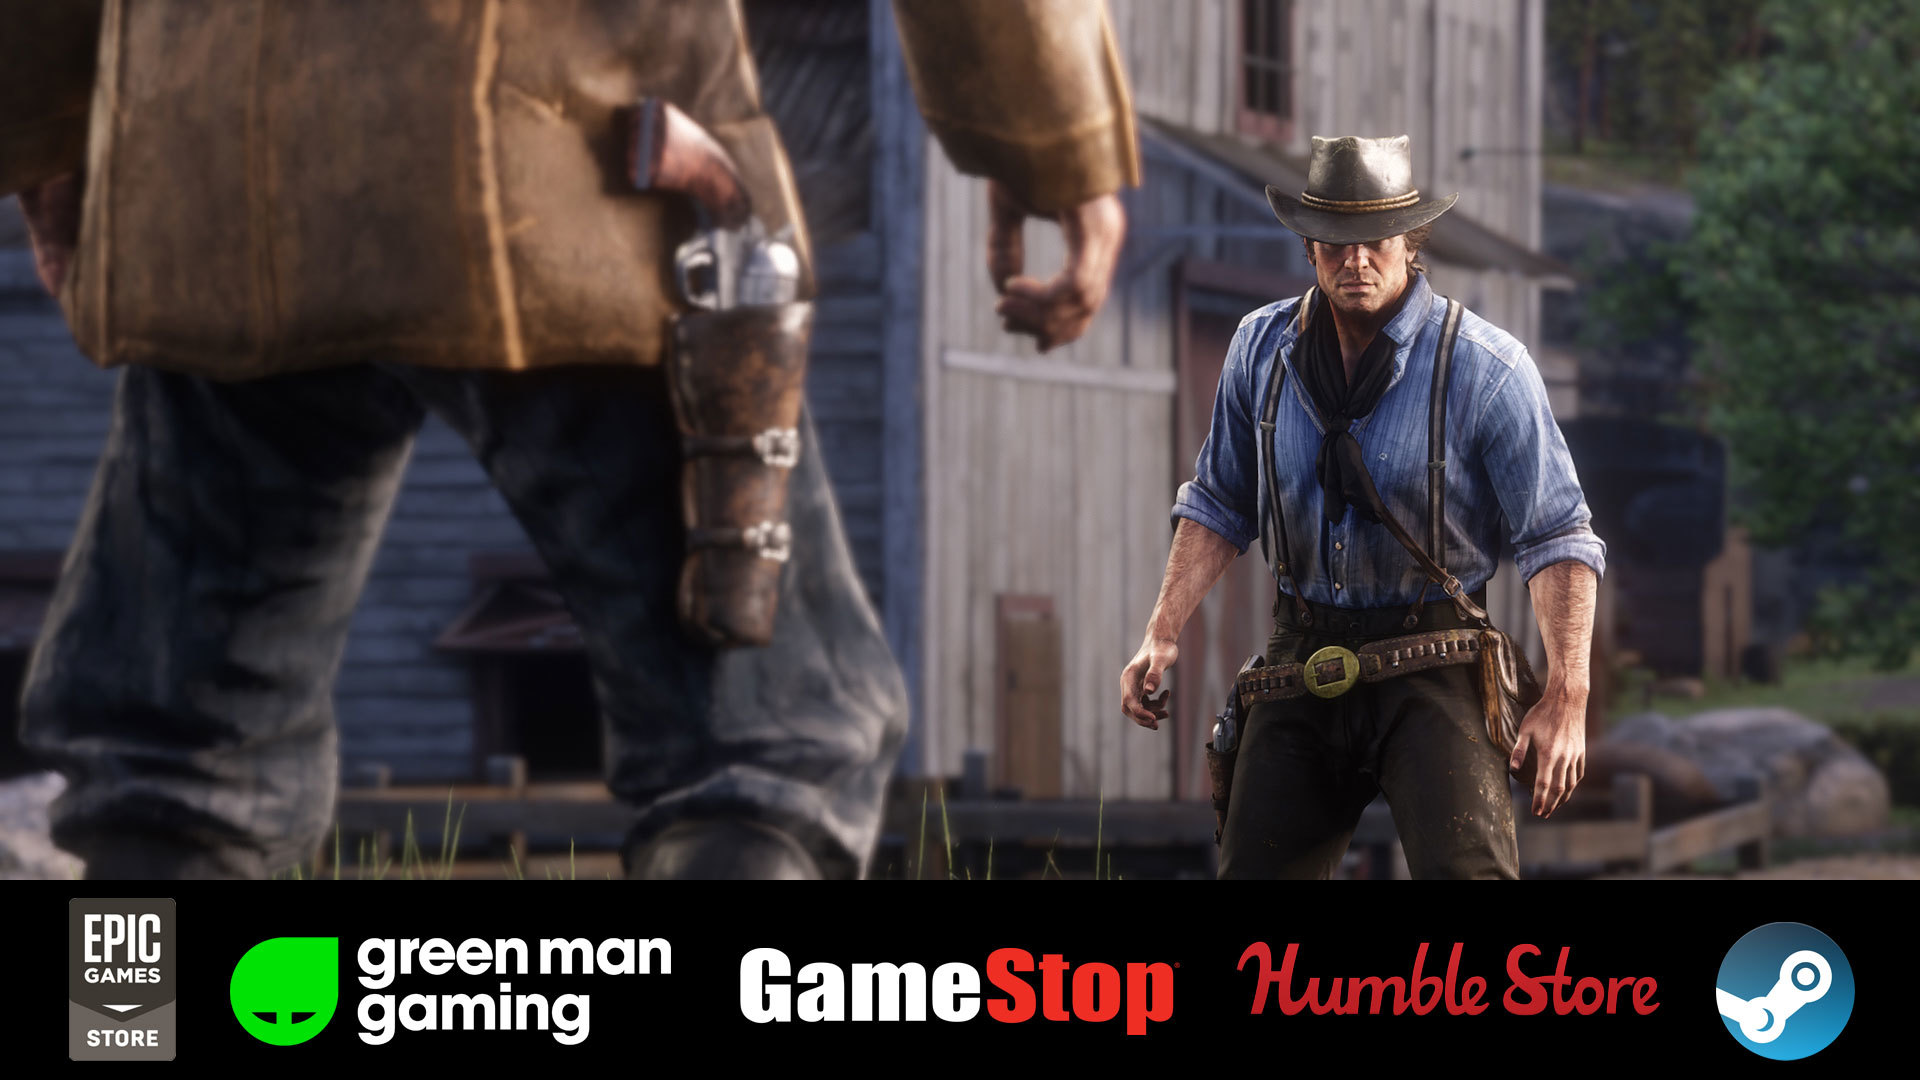 Red Dead Redemption 2 On PC: Get $4 To $50 Back On Your Pre